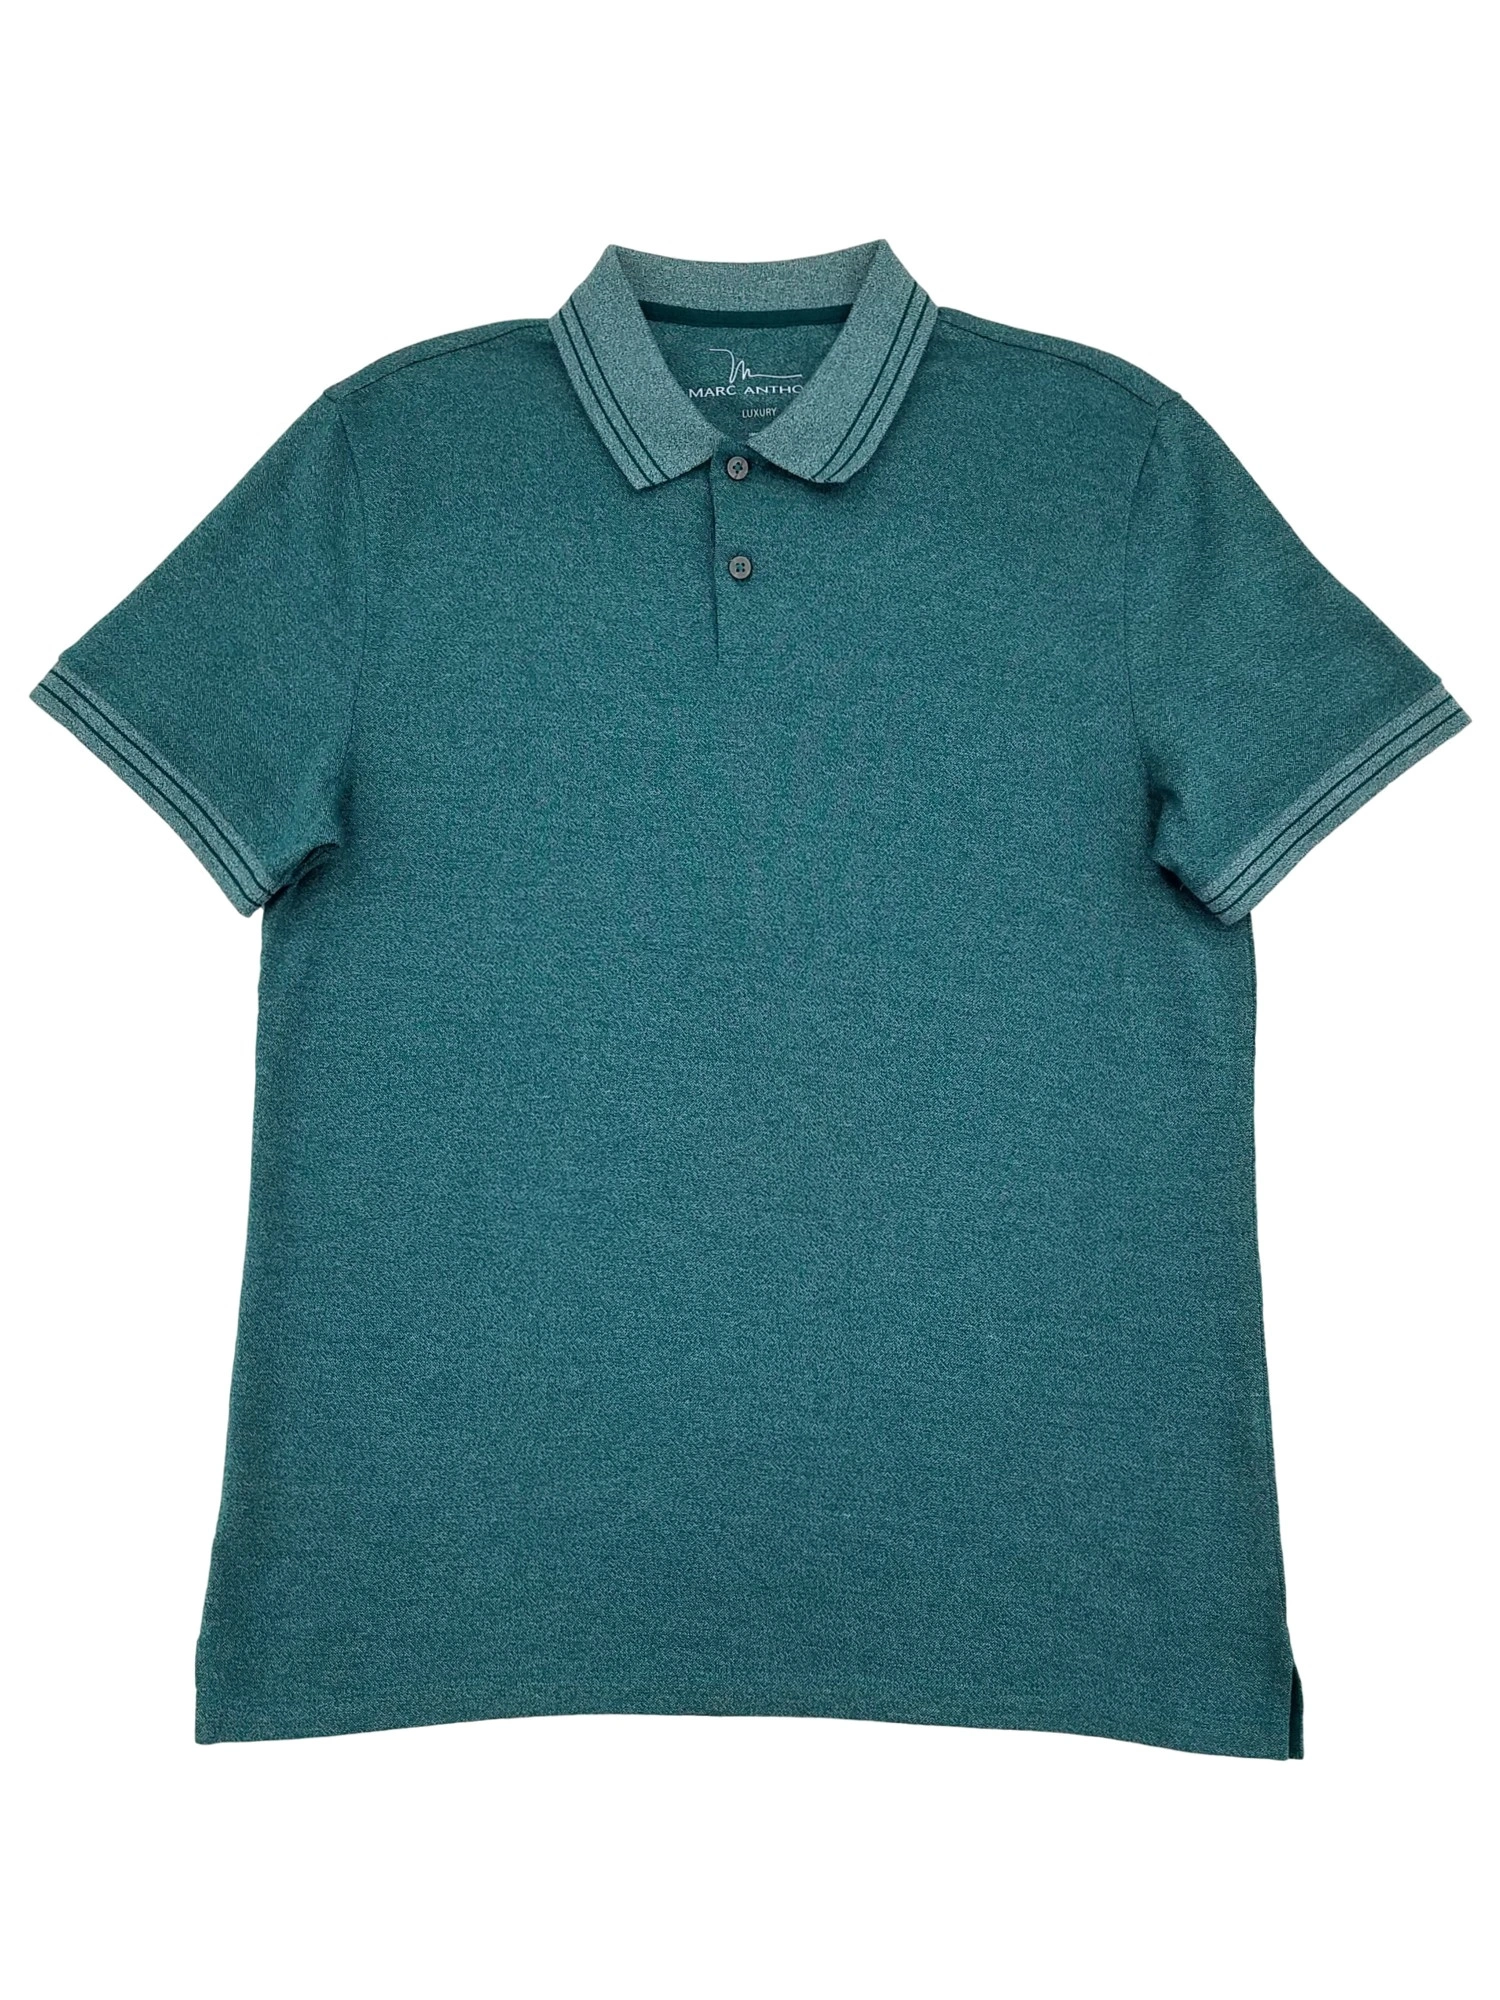 Wholesale Mens Polo Shirt Supplier In Oman